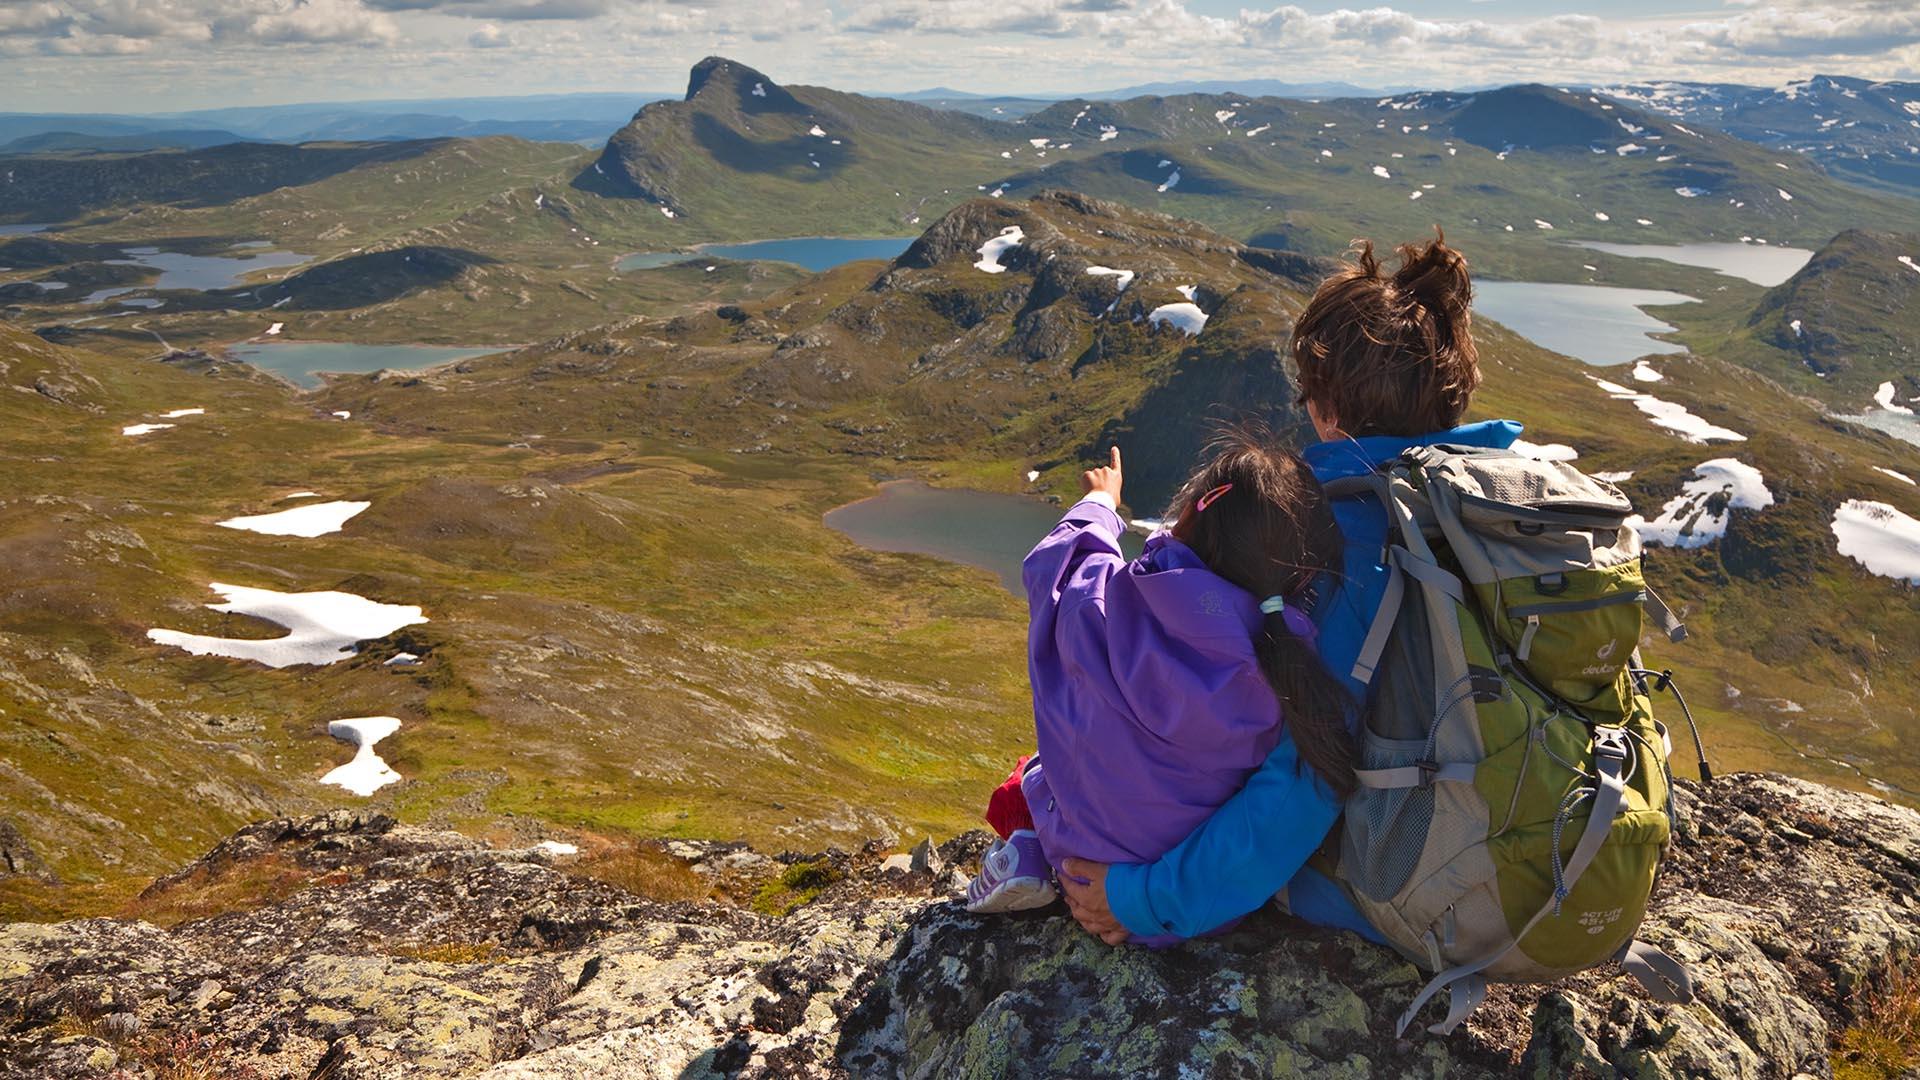 Woman and child sitting on mountaintop enoying the vast view over mountains and lakes.